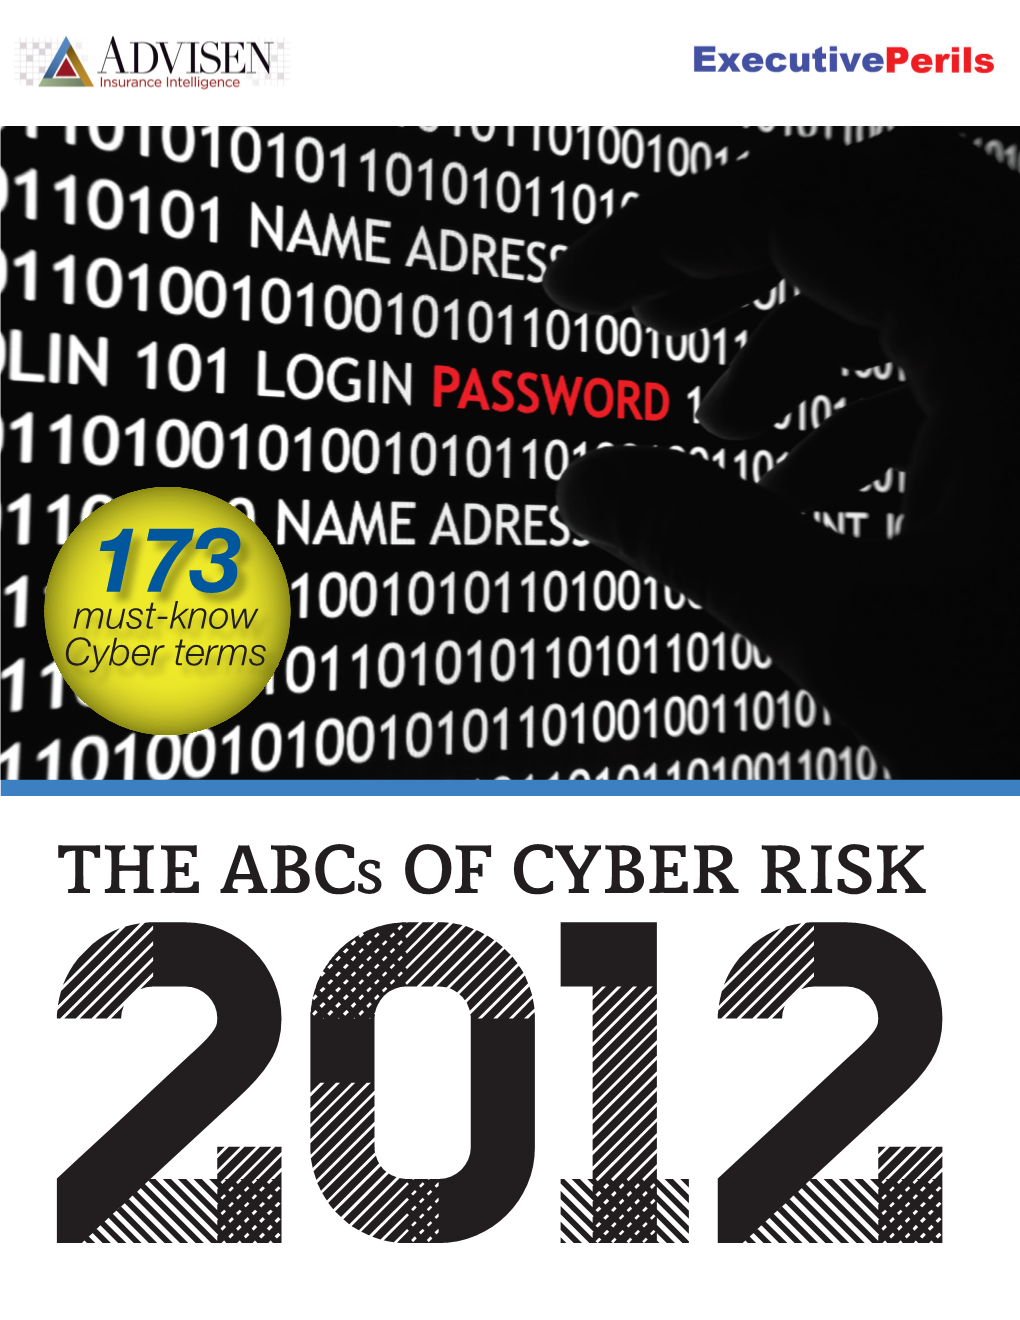 The Abcs of Cyber Risk